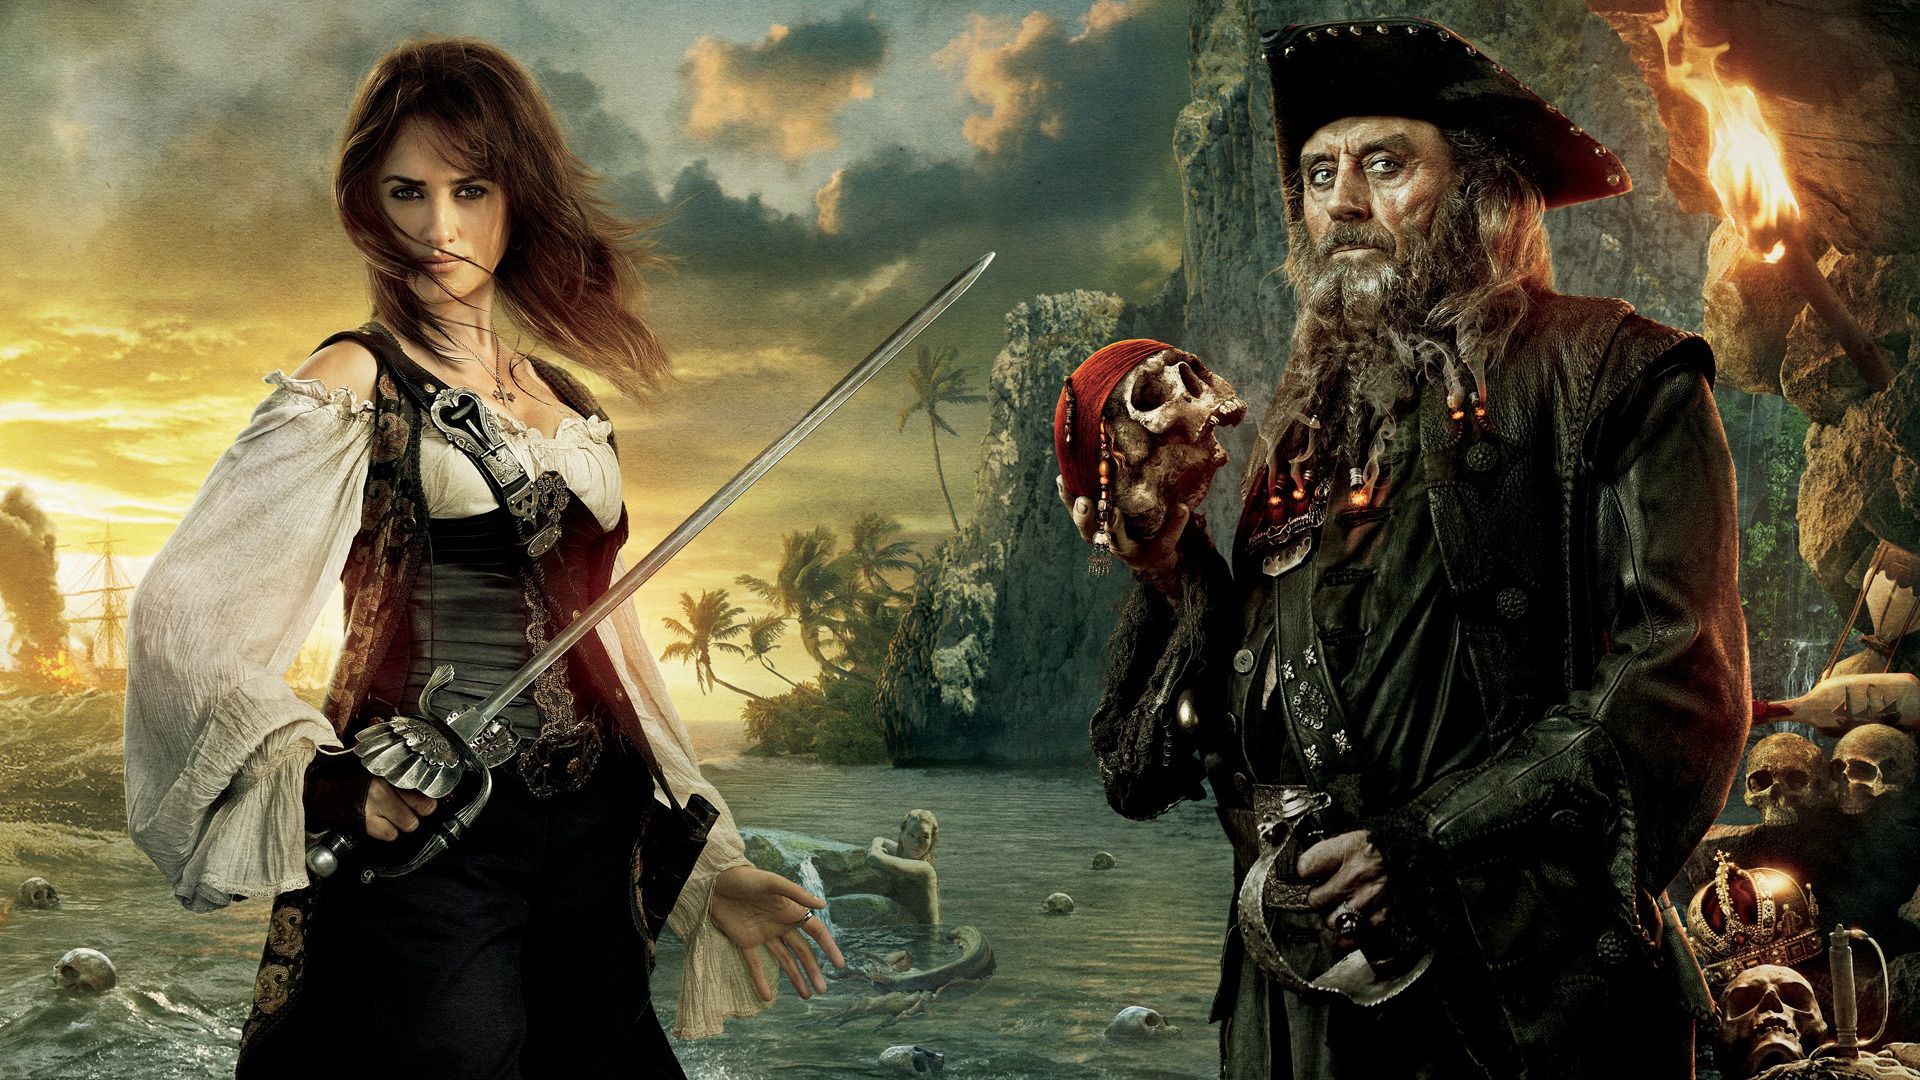 Pirates of the Caribbean free downloads